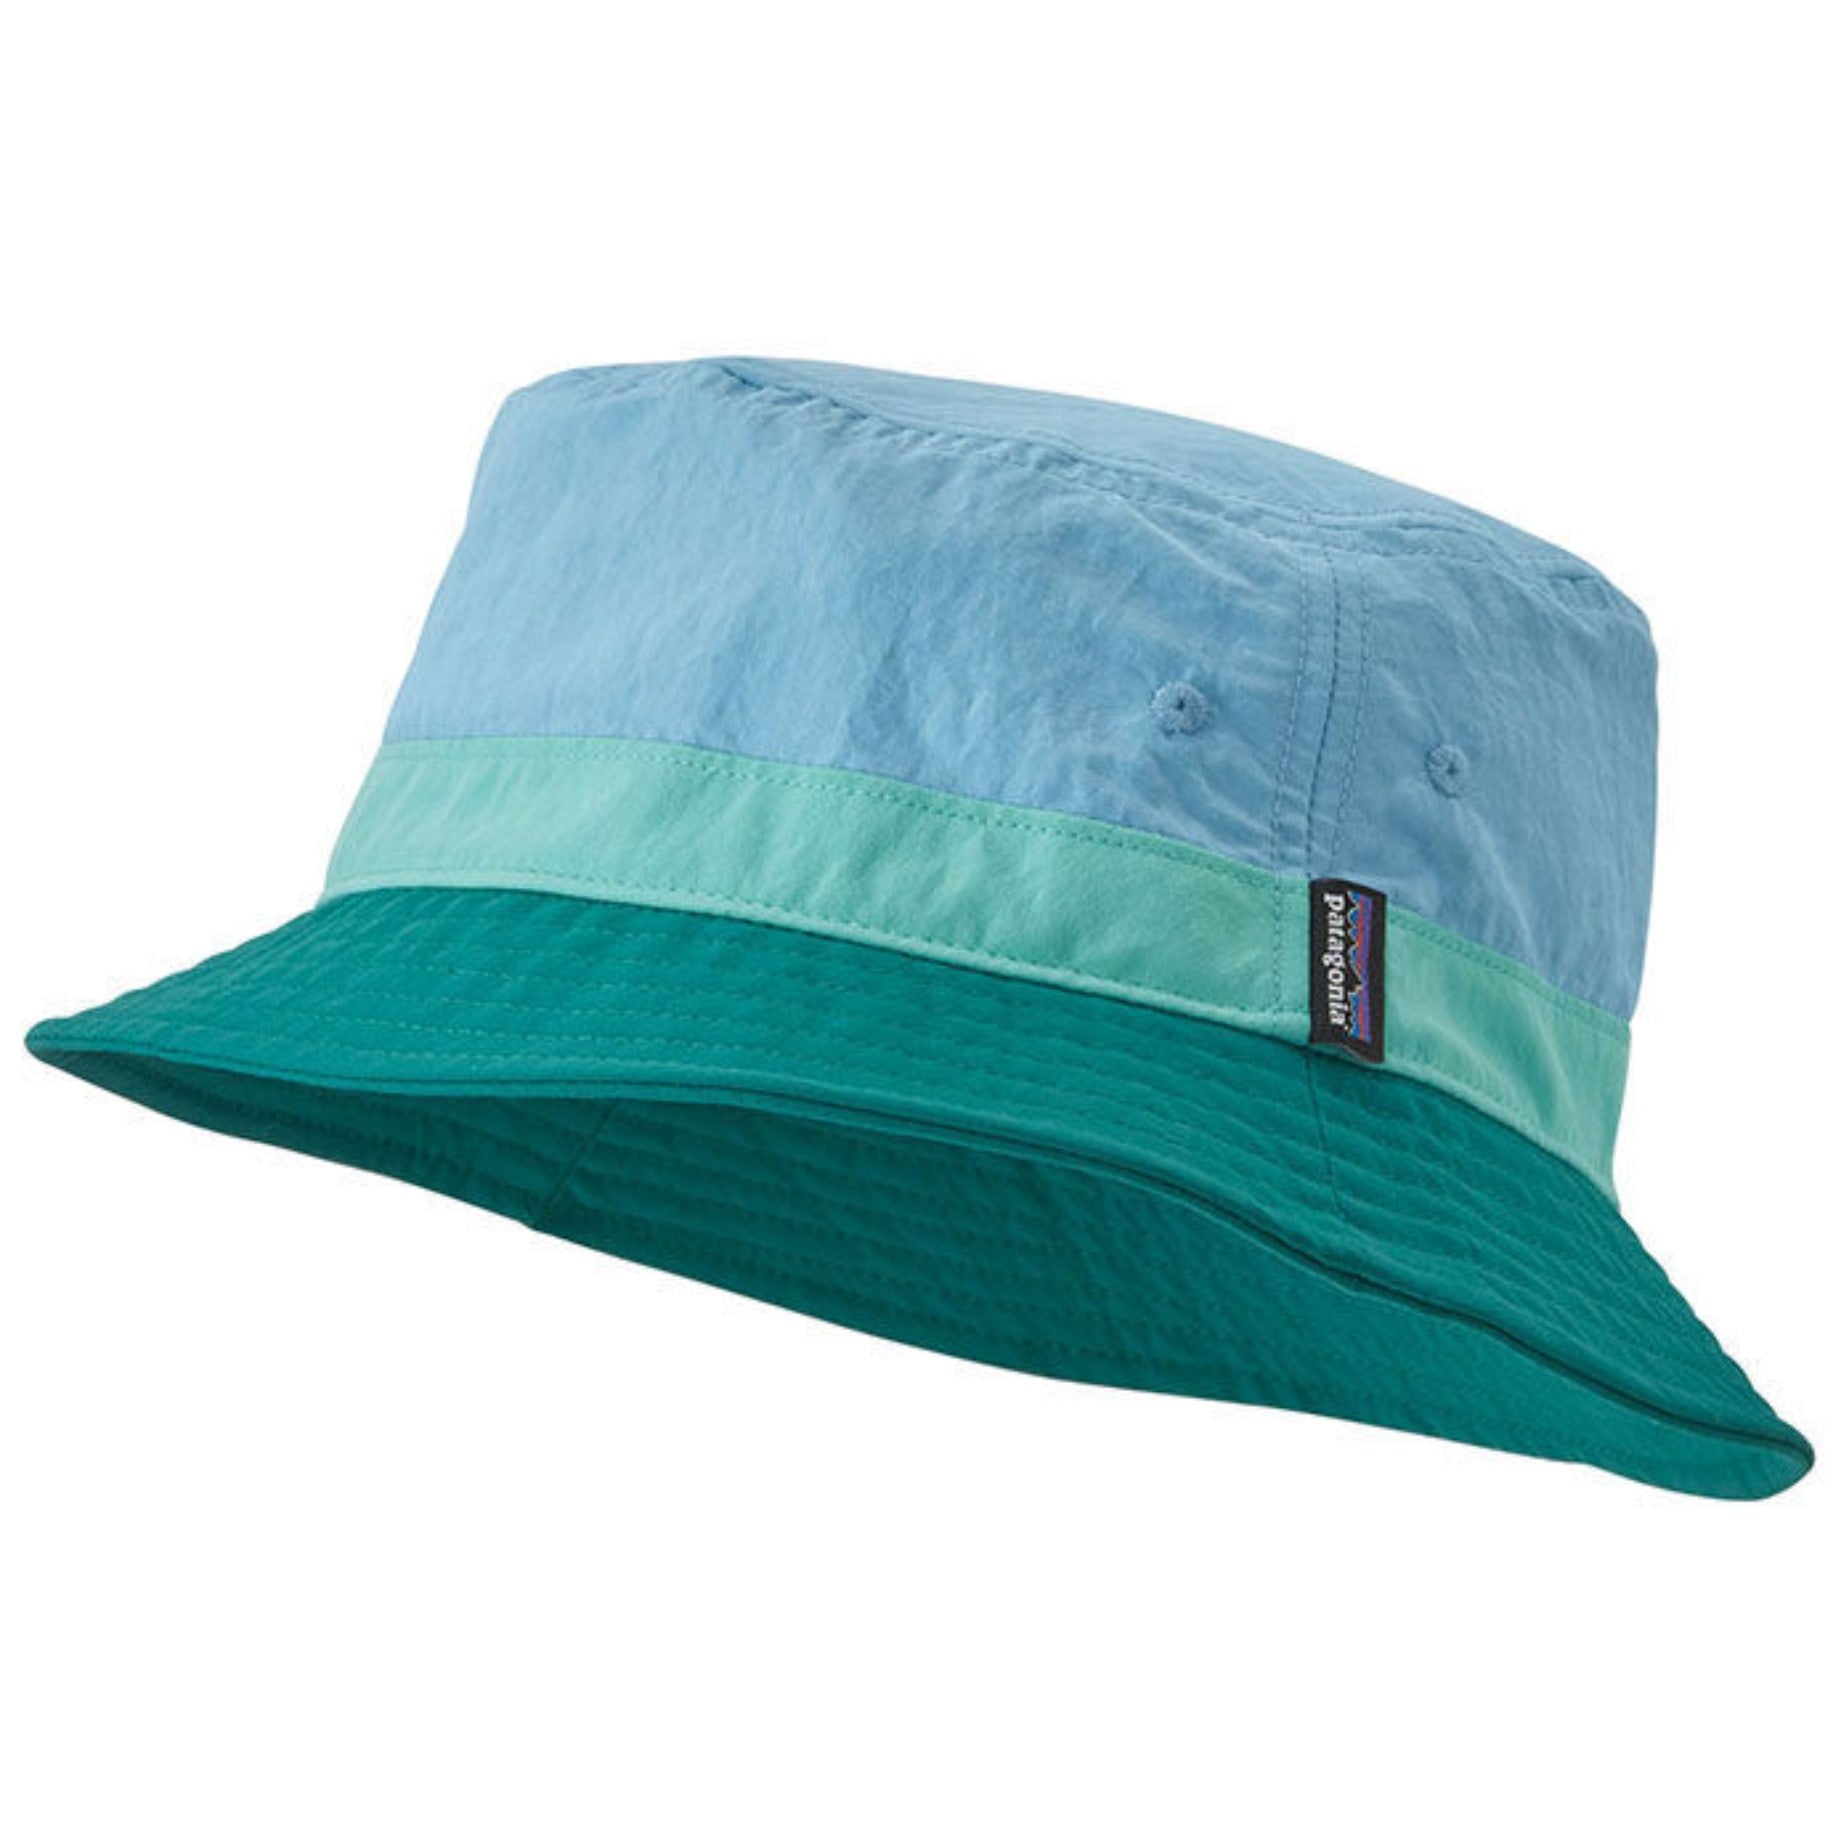 Patagonia Bucket Hat - Accessories